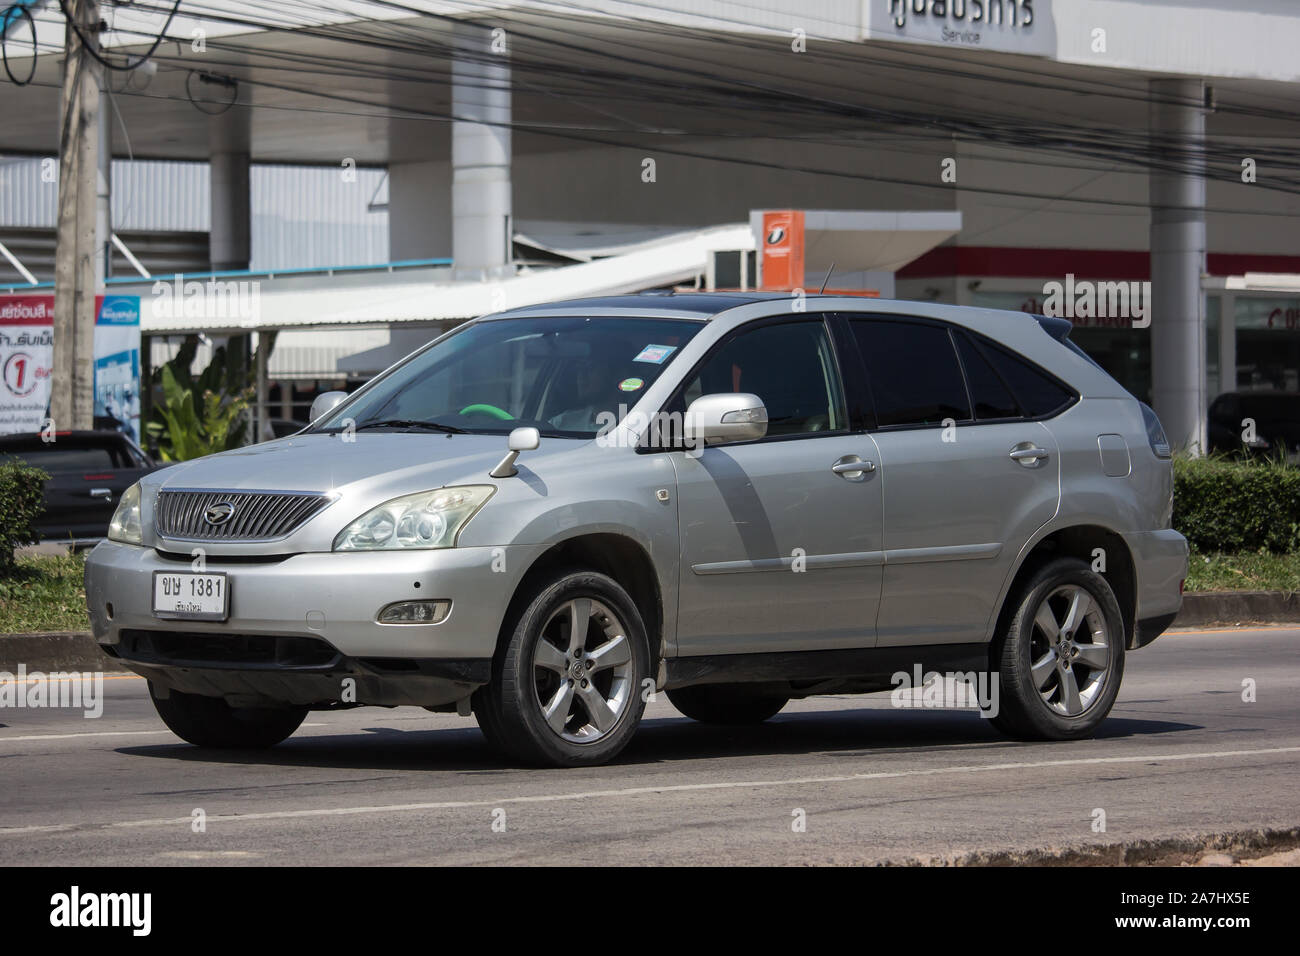 Chiangmai, Thailand -  October 10 2019: Private Suv car Lexus RX300.   On road no.1001, 8 km from Chiangmai city. Stock Photo